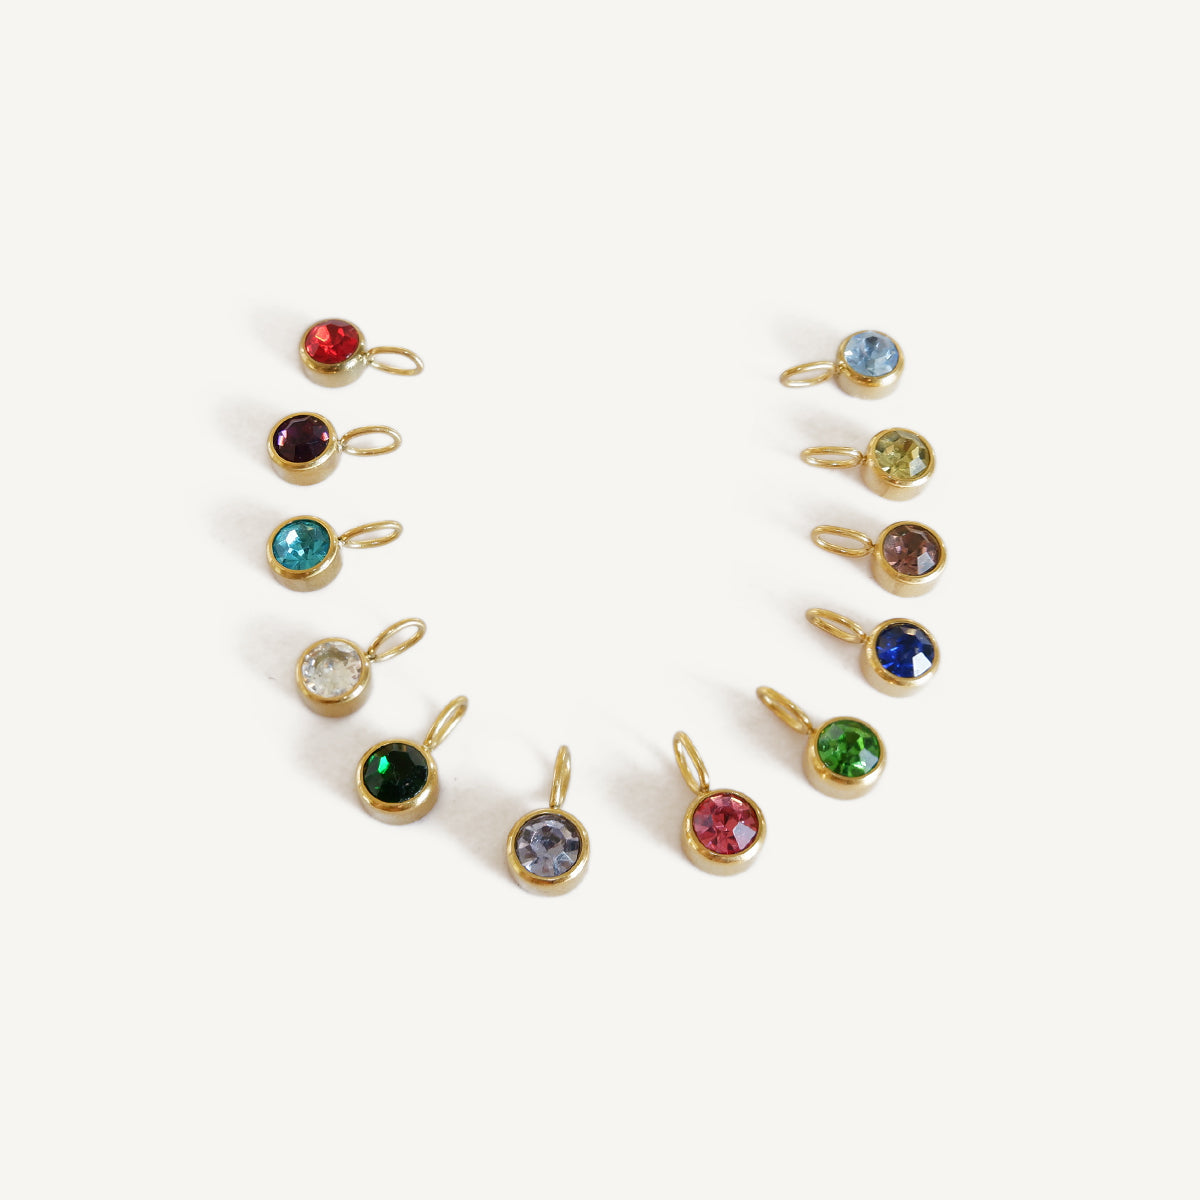 The Dainty Birthstone Charm in Solid Gold